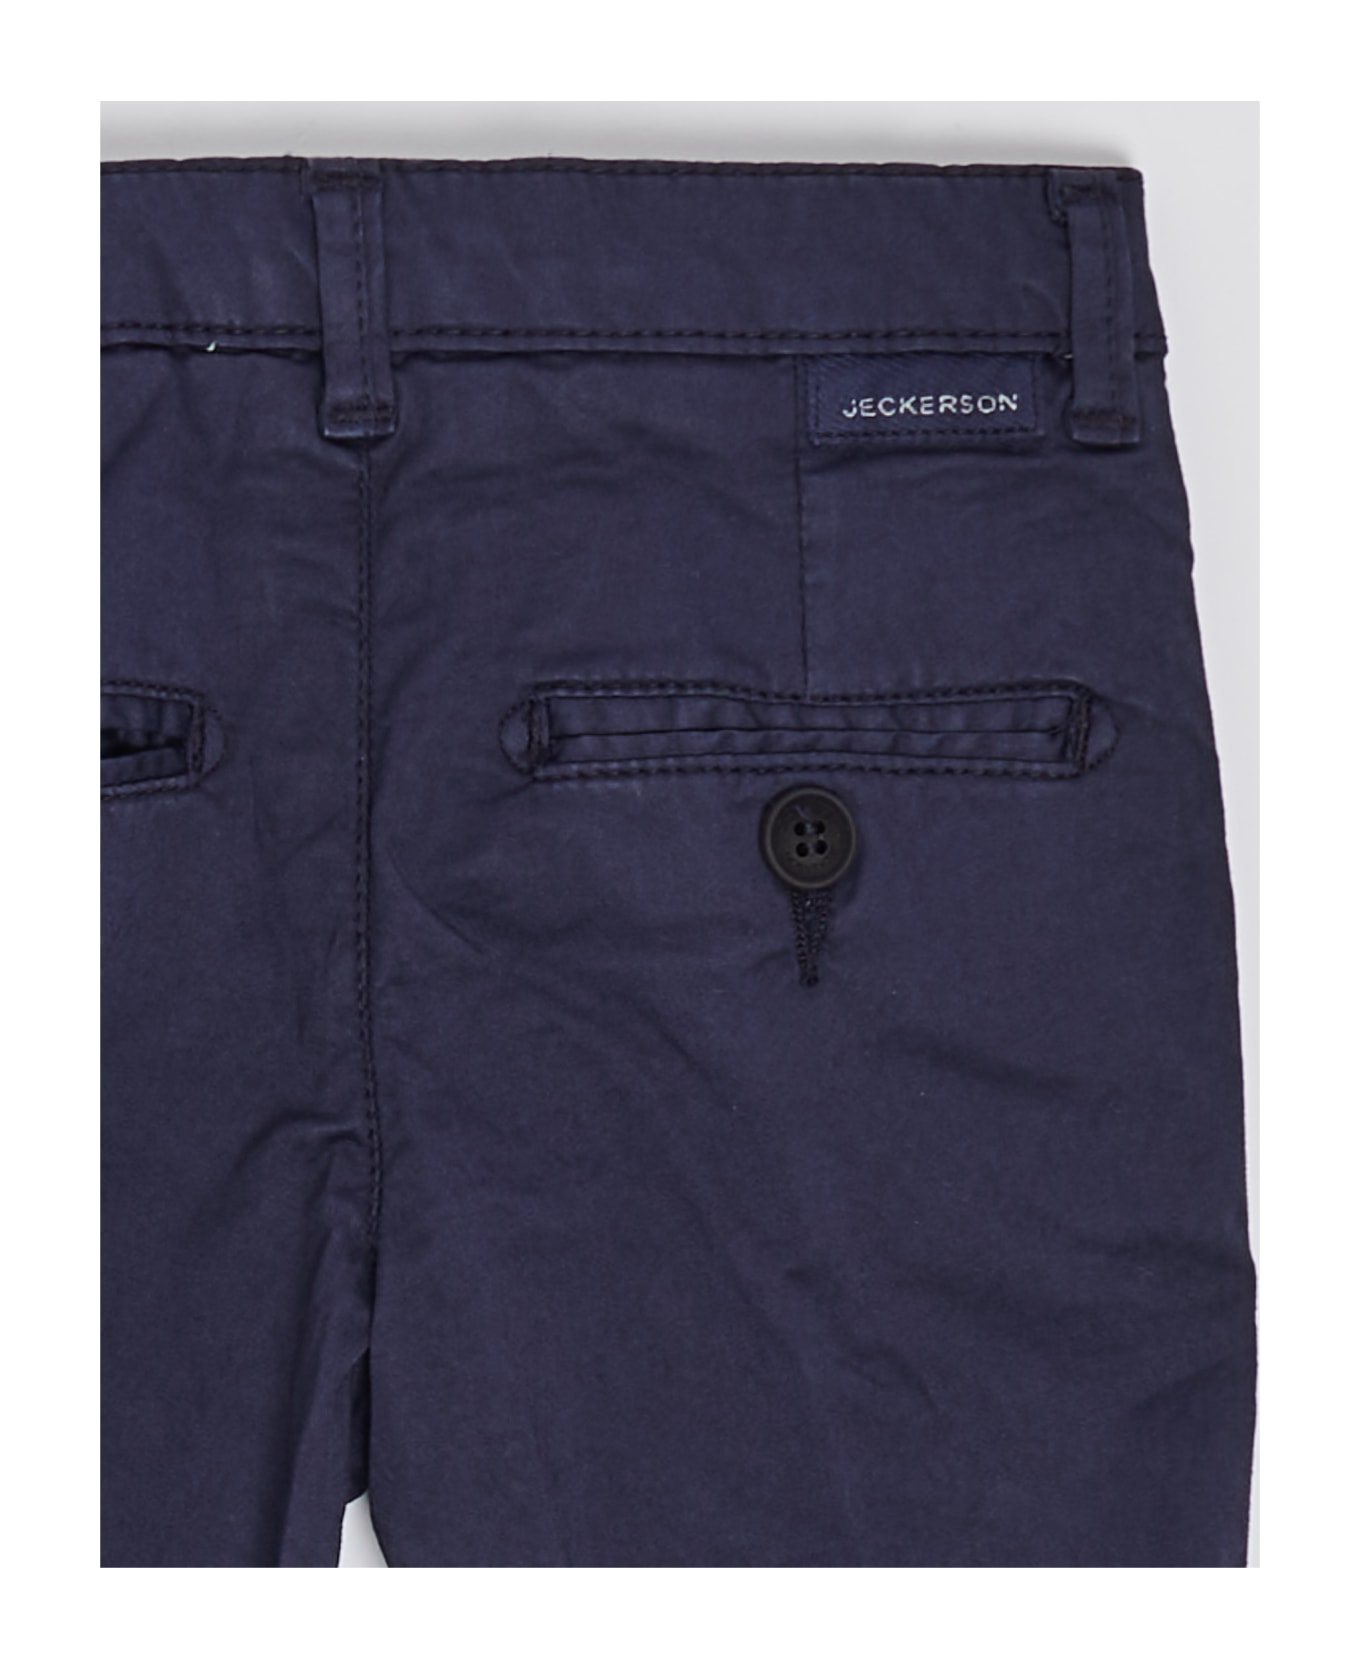 Jeckerson Trousers Trousers - BLU ボトムス